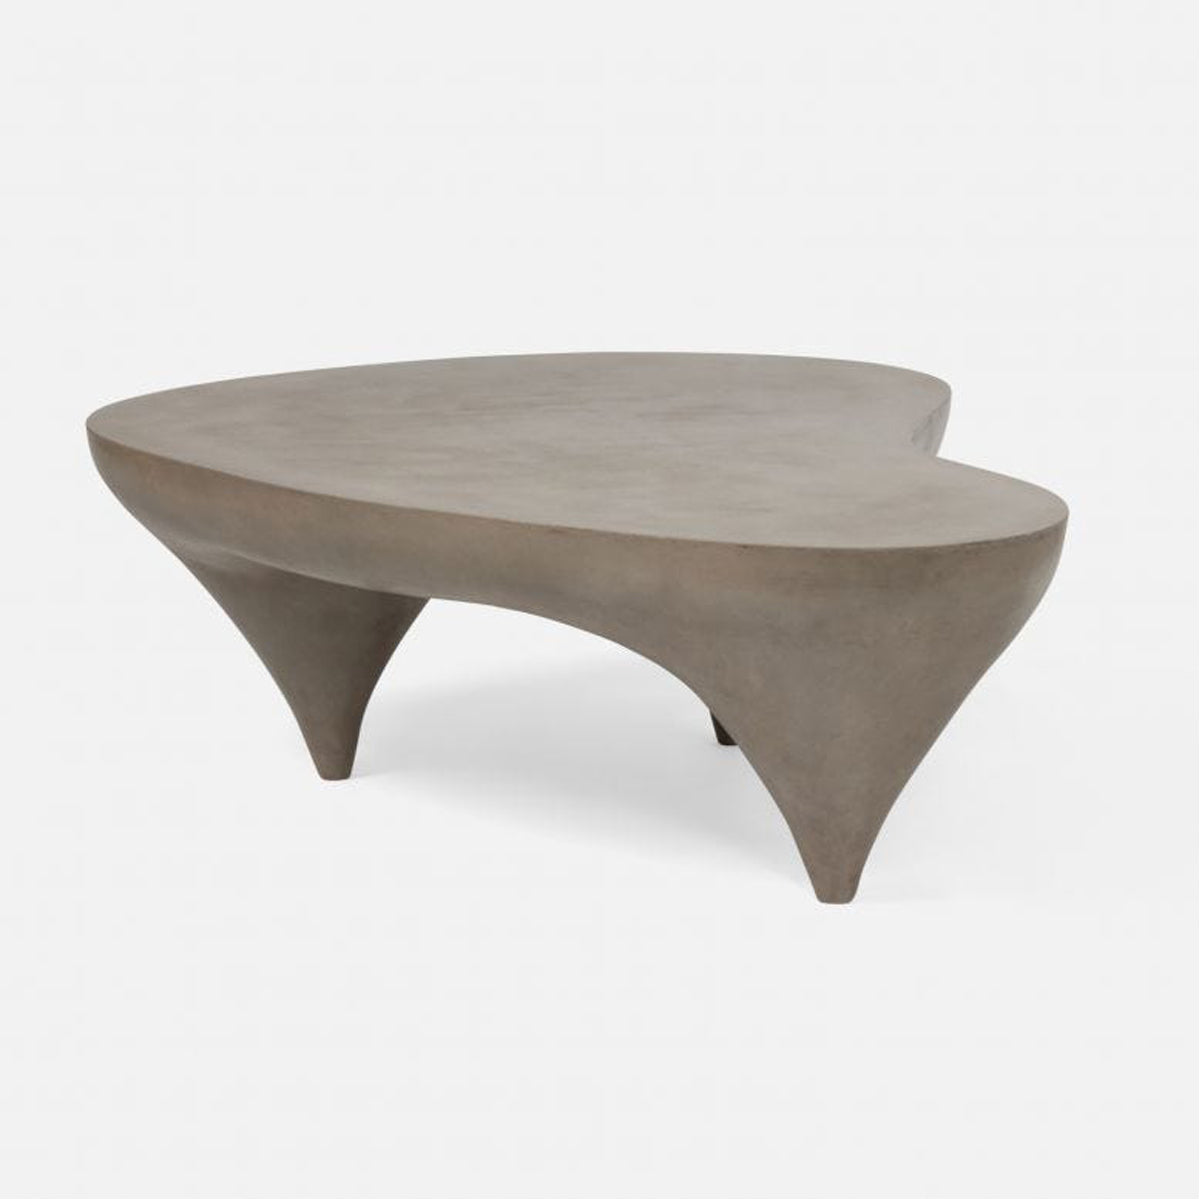 Made Goods Fairbanks Sculptural Outdoor Coffee Table